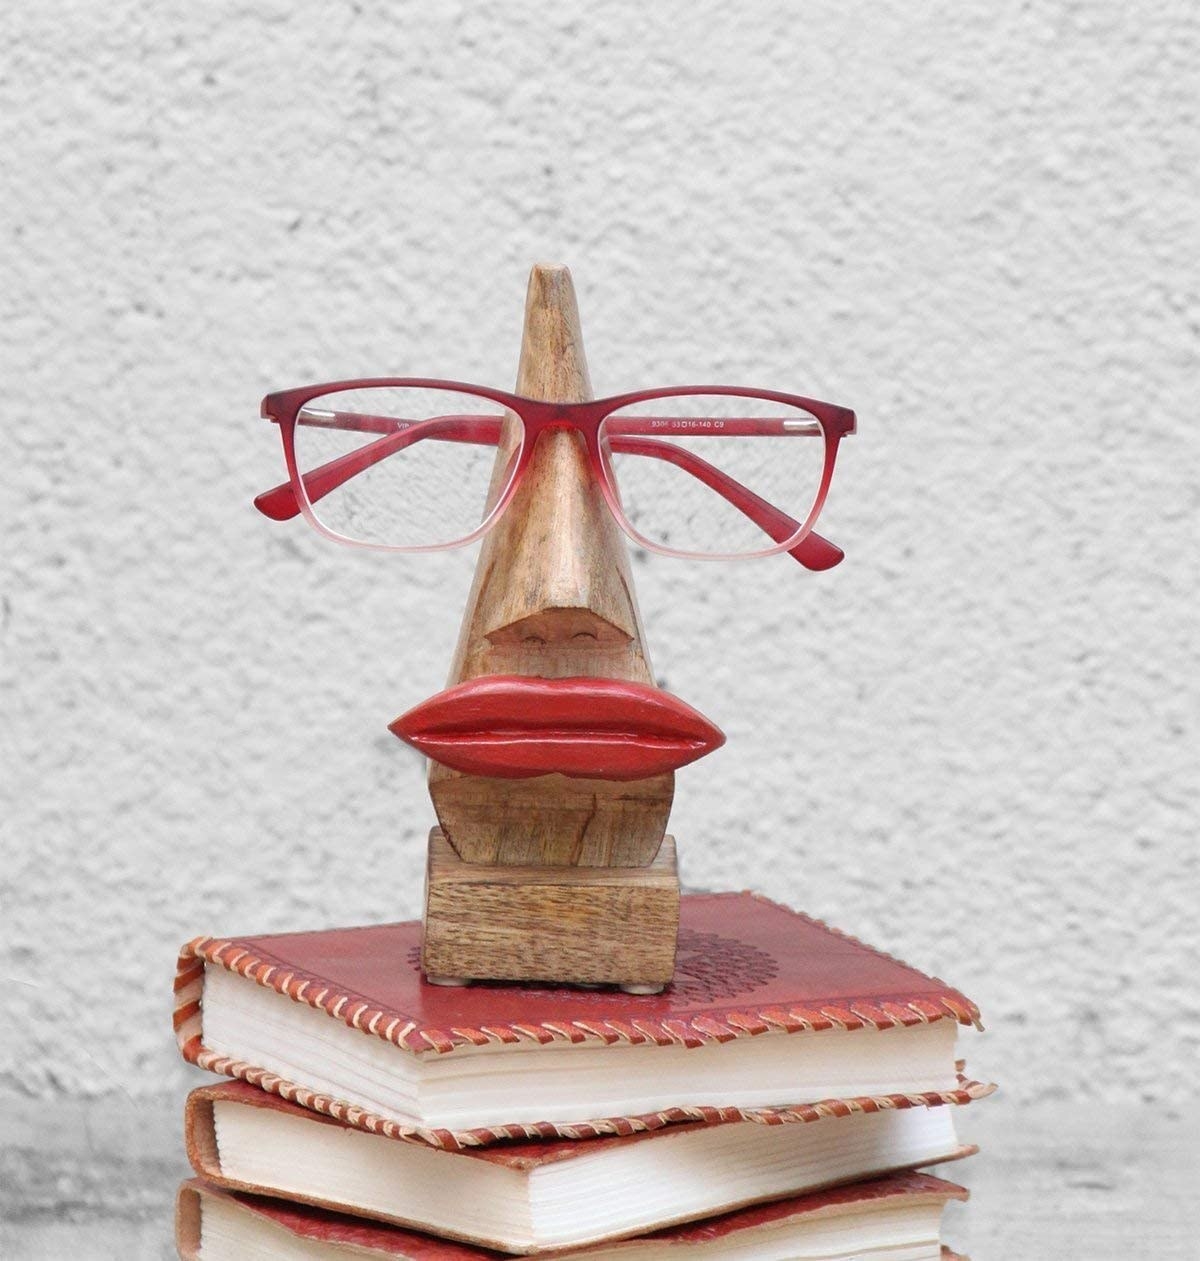 A woden nose shaped eyeglasses holder with red lips resting on a pile of red books 